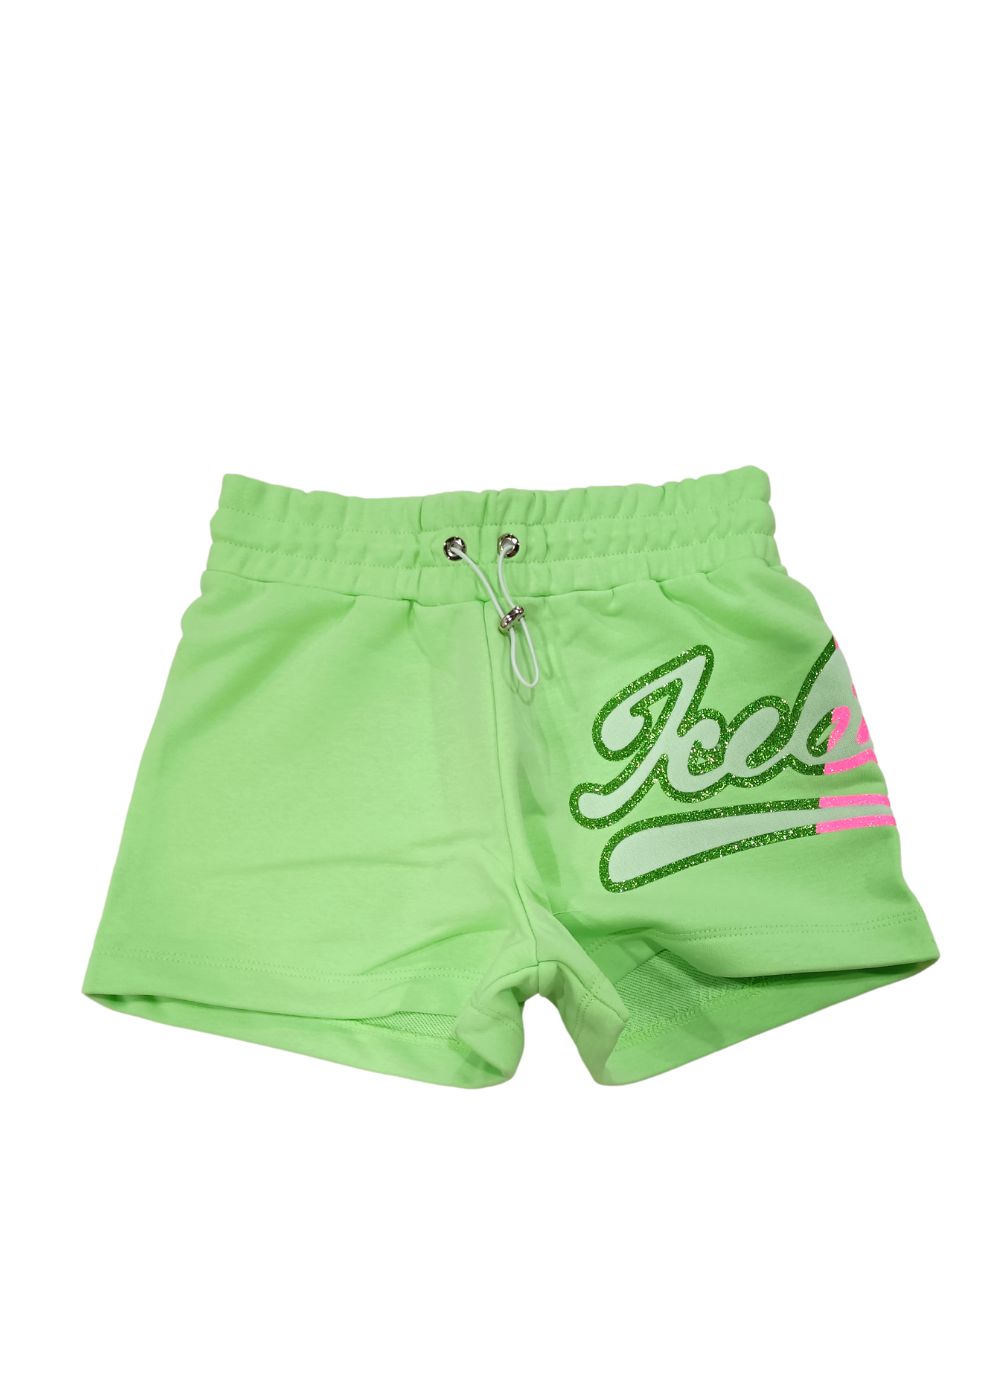 Featured image for “Iceberg Shorts Color Menta”